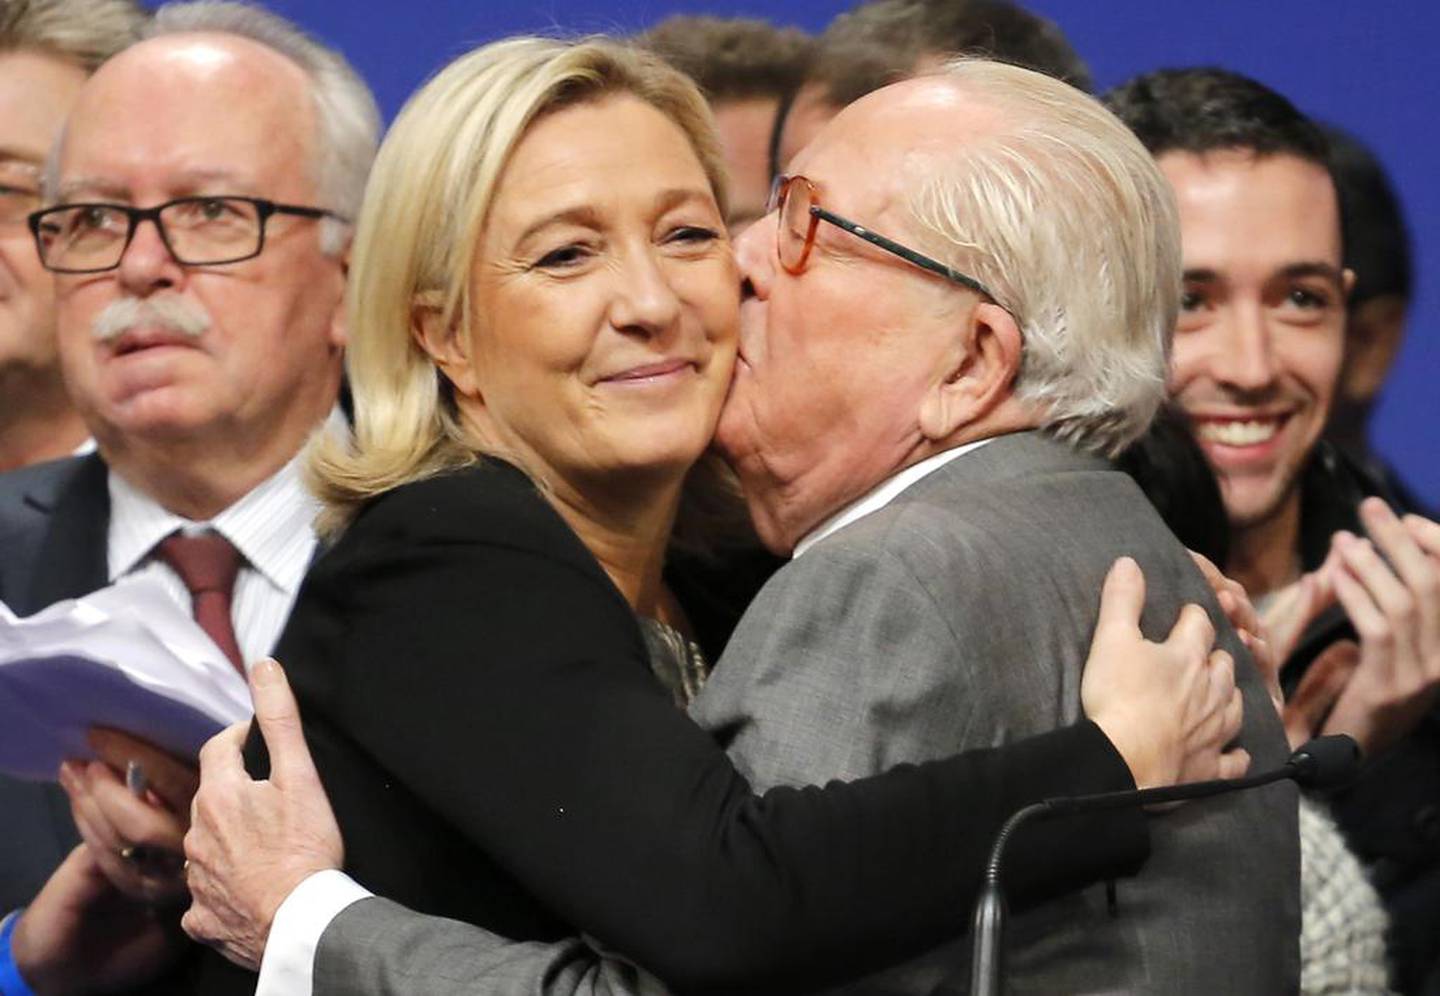 French far-right National Front leader Marine Le Pen is kissed by her father Jean-Marie Le Pen after being re-elected as president of the party in 2014. AP